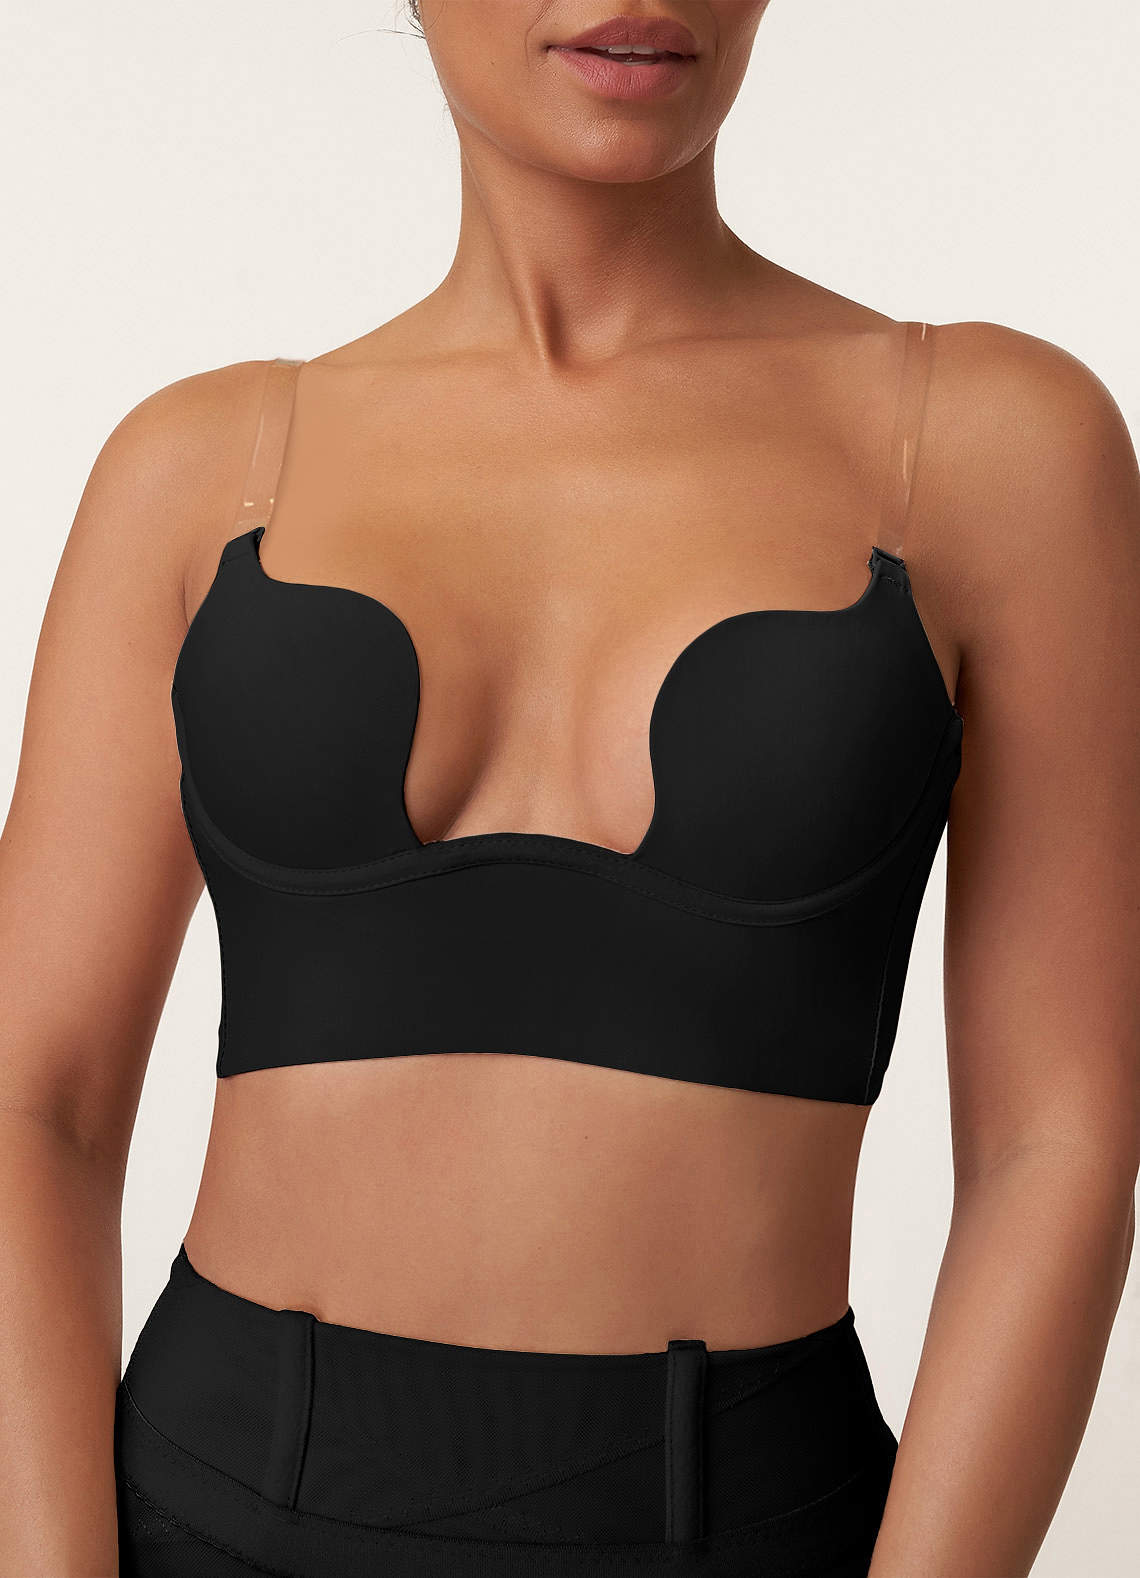 The Bra That Matches The Dress